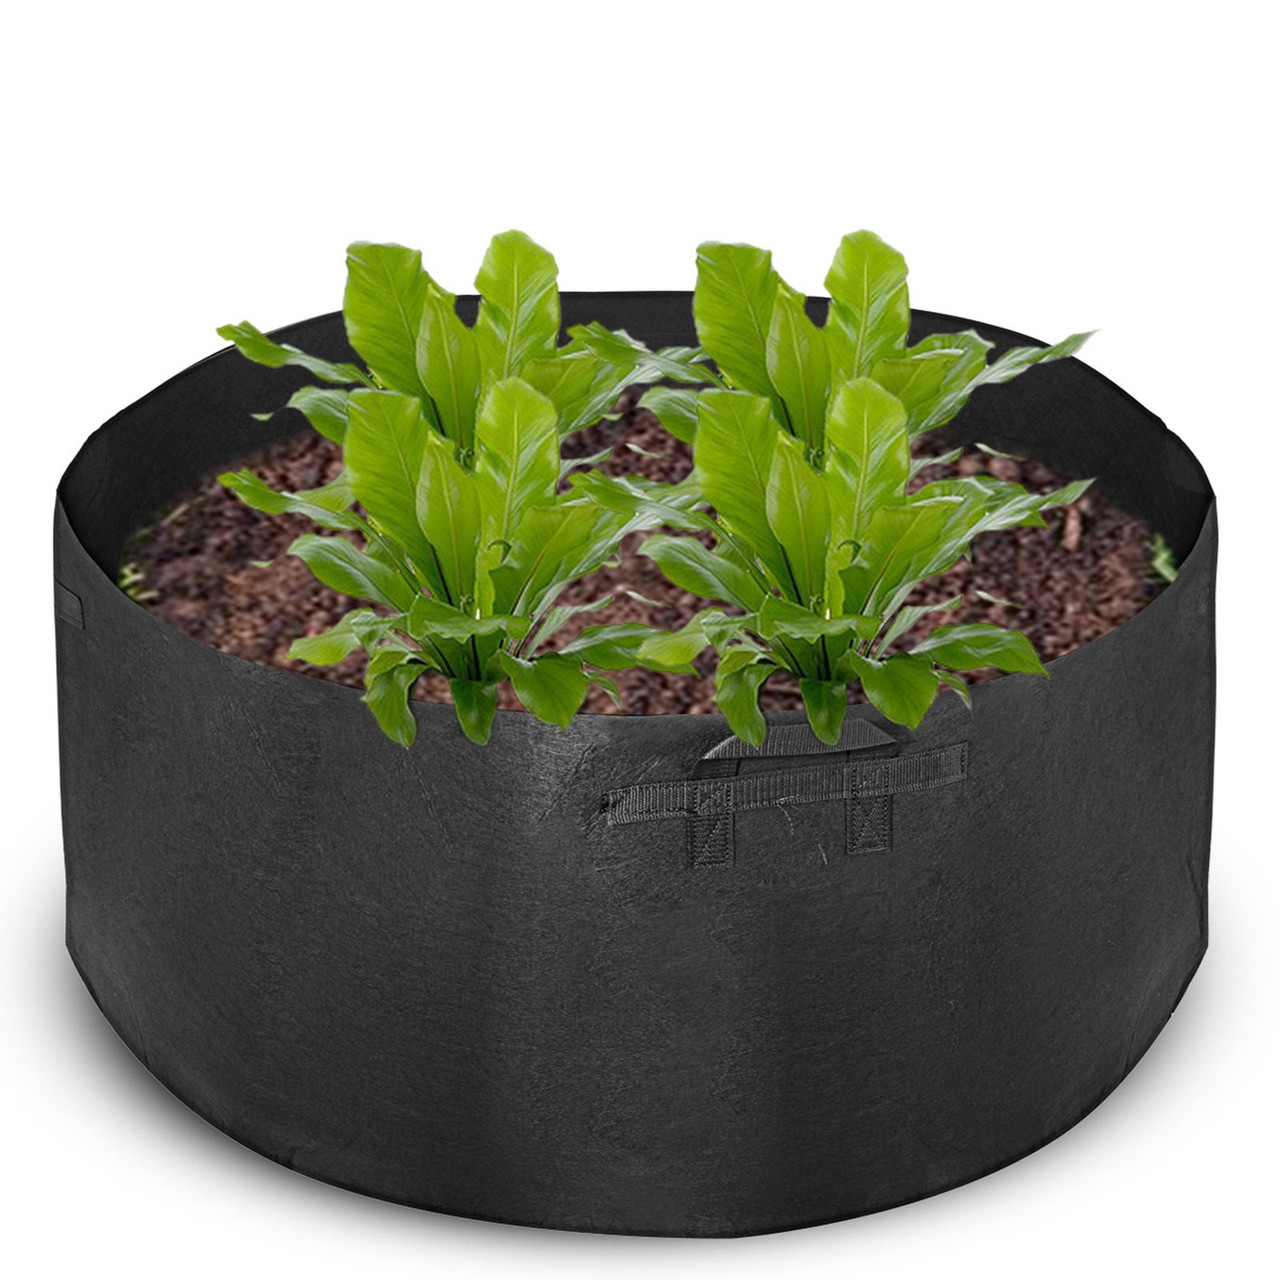 5-Pack 200 Gallon Plant Grow Bag Aeration Fabric Pots with Handles Black Grow Bag Plant Container for Garden Planting Washable and Reusable